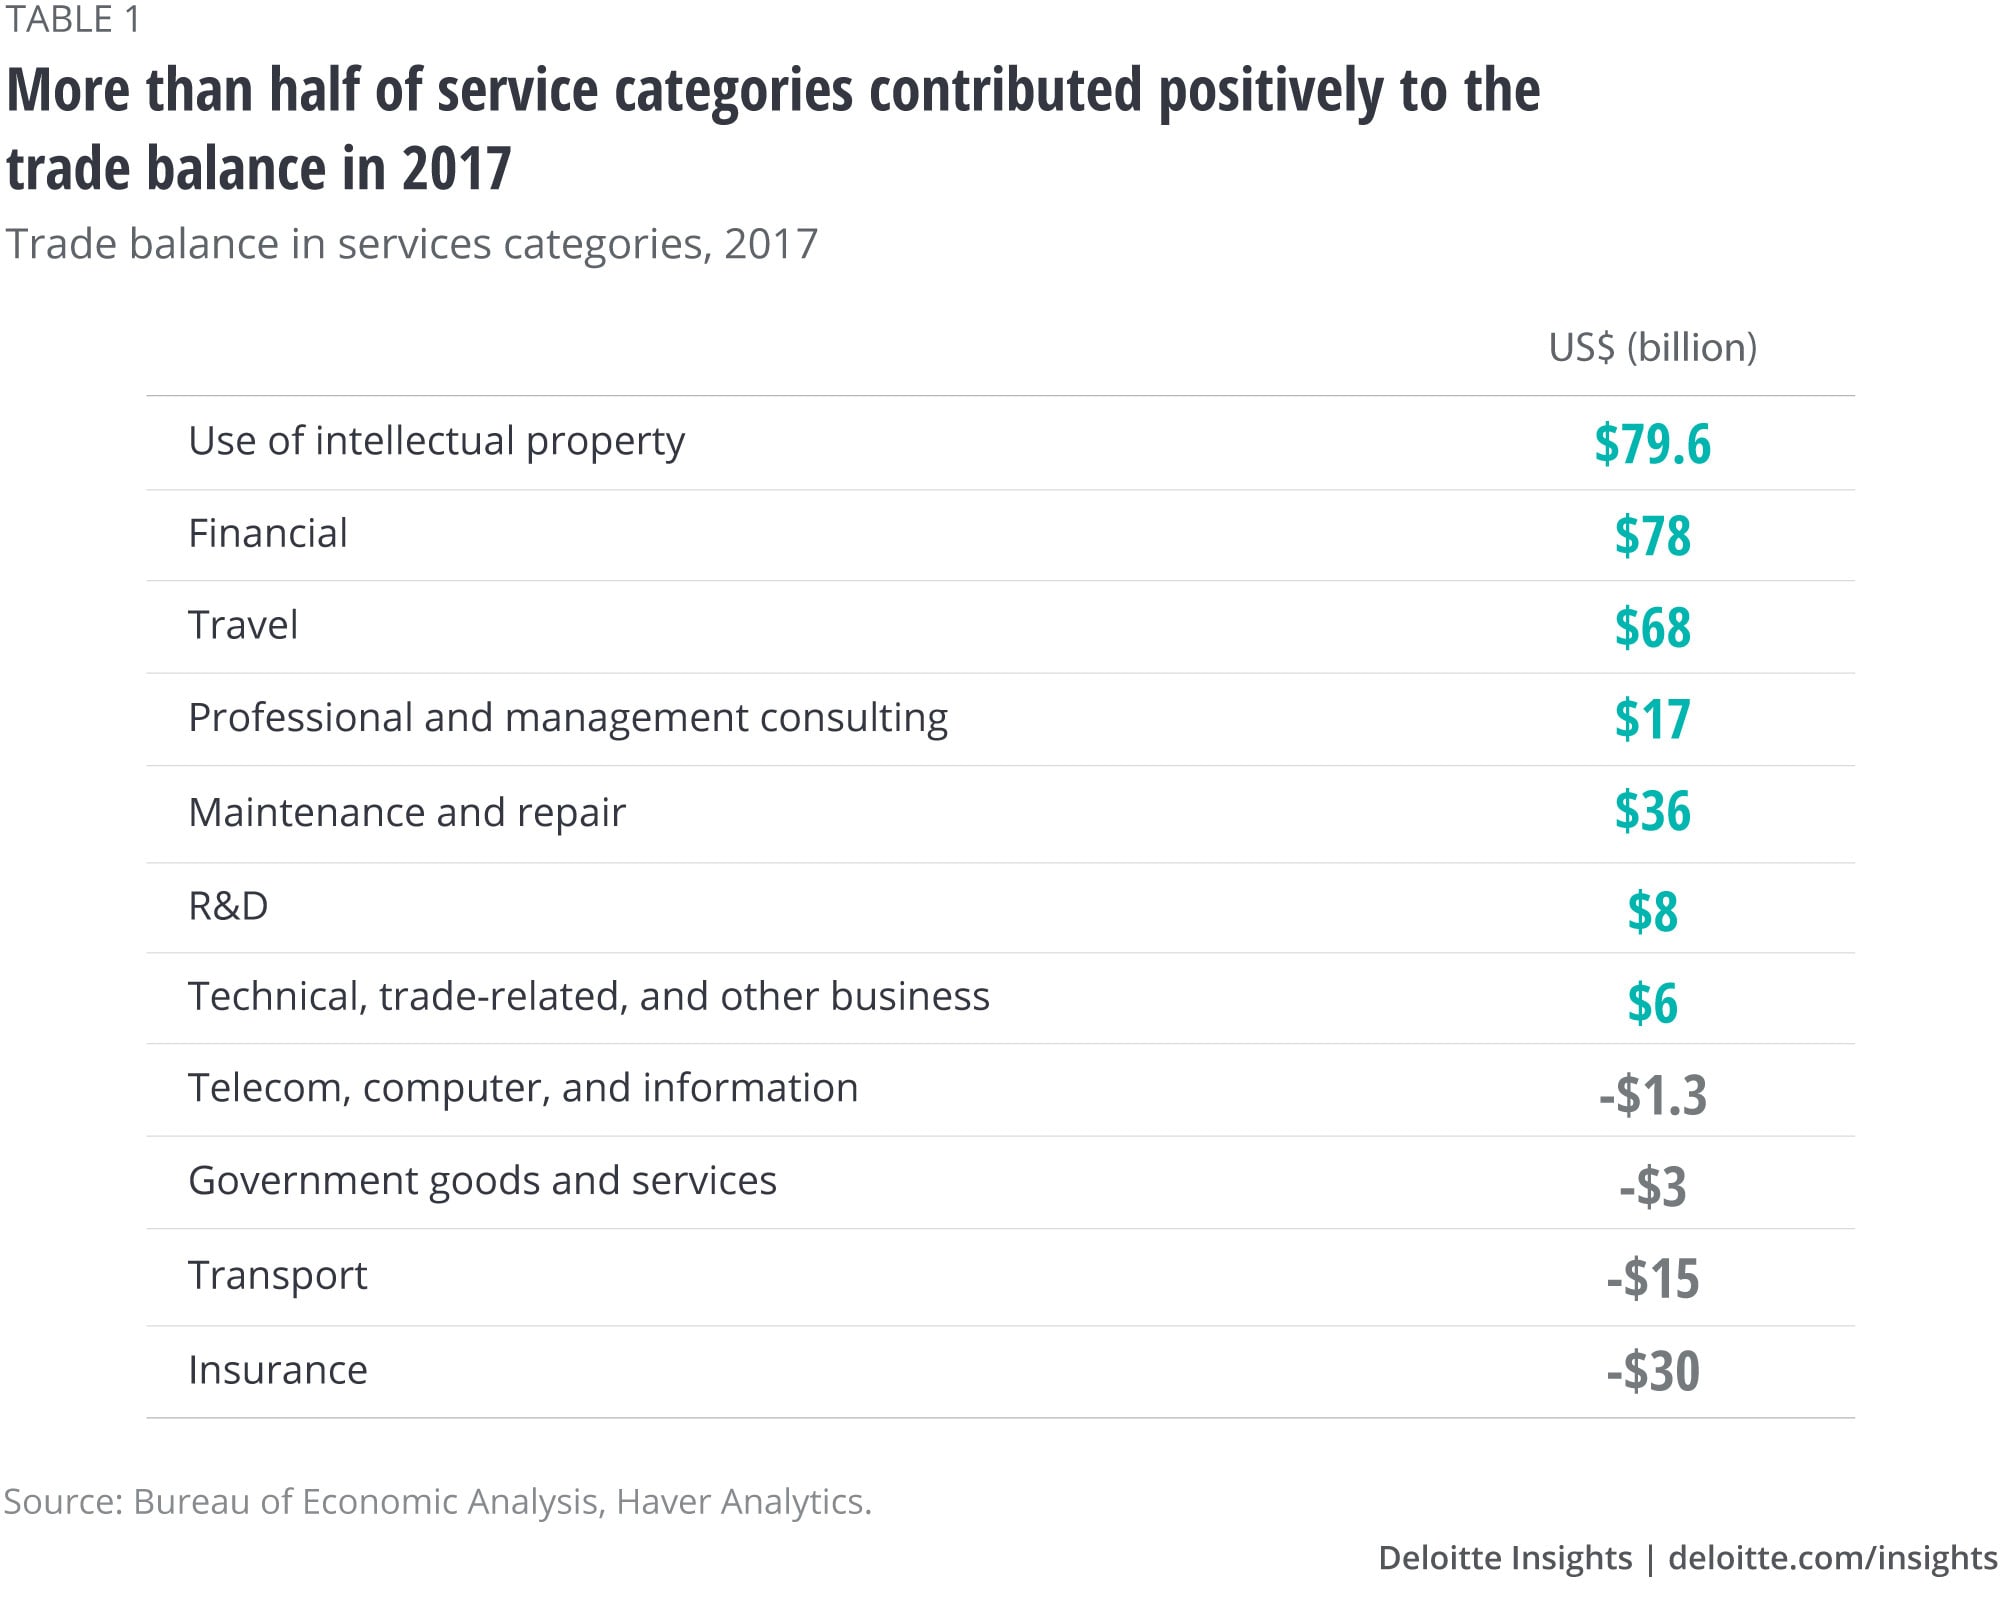 More than half of service categories contributed positively to the trade balance in 2017